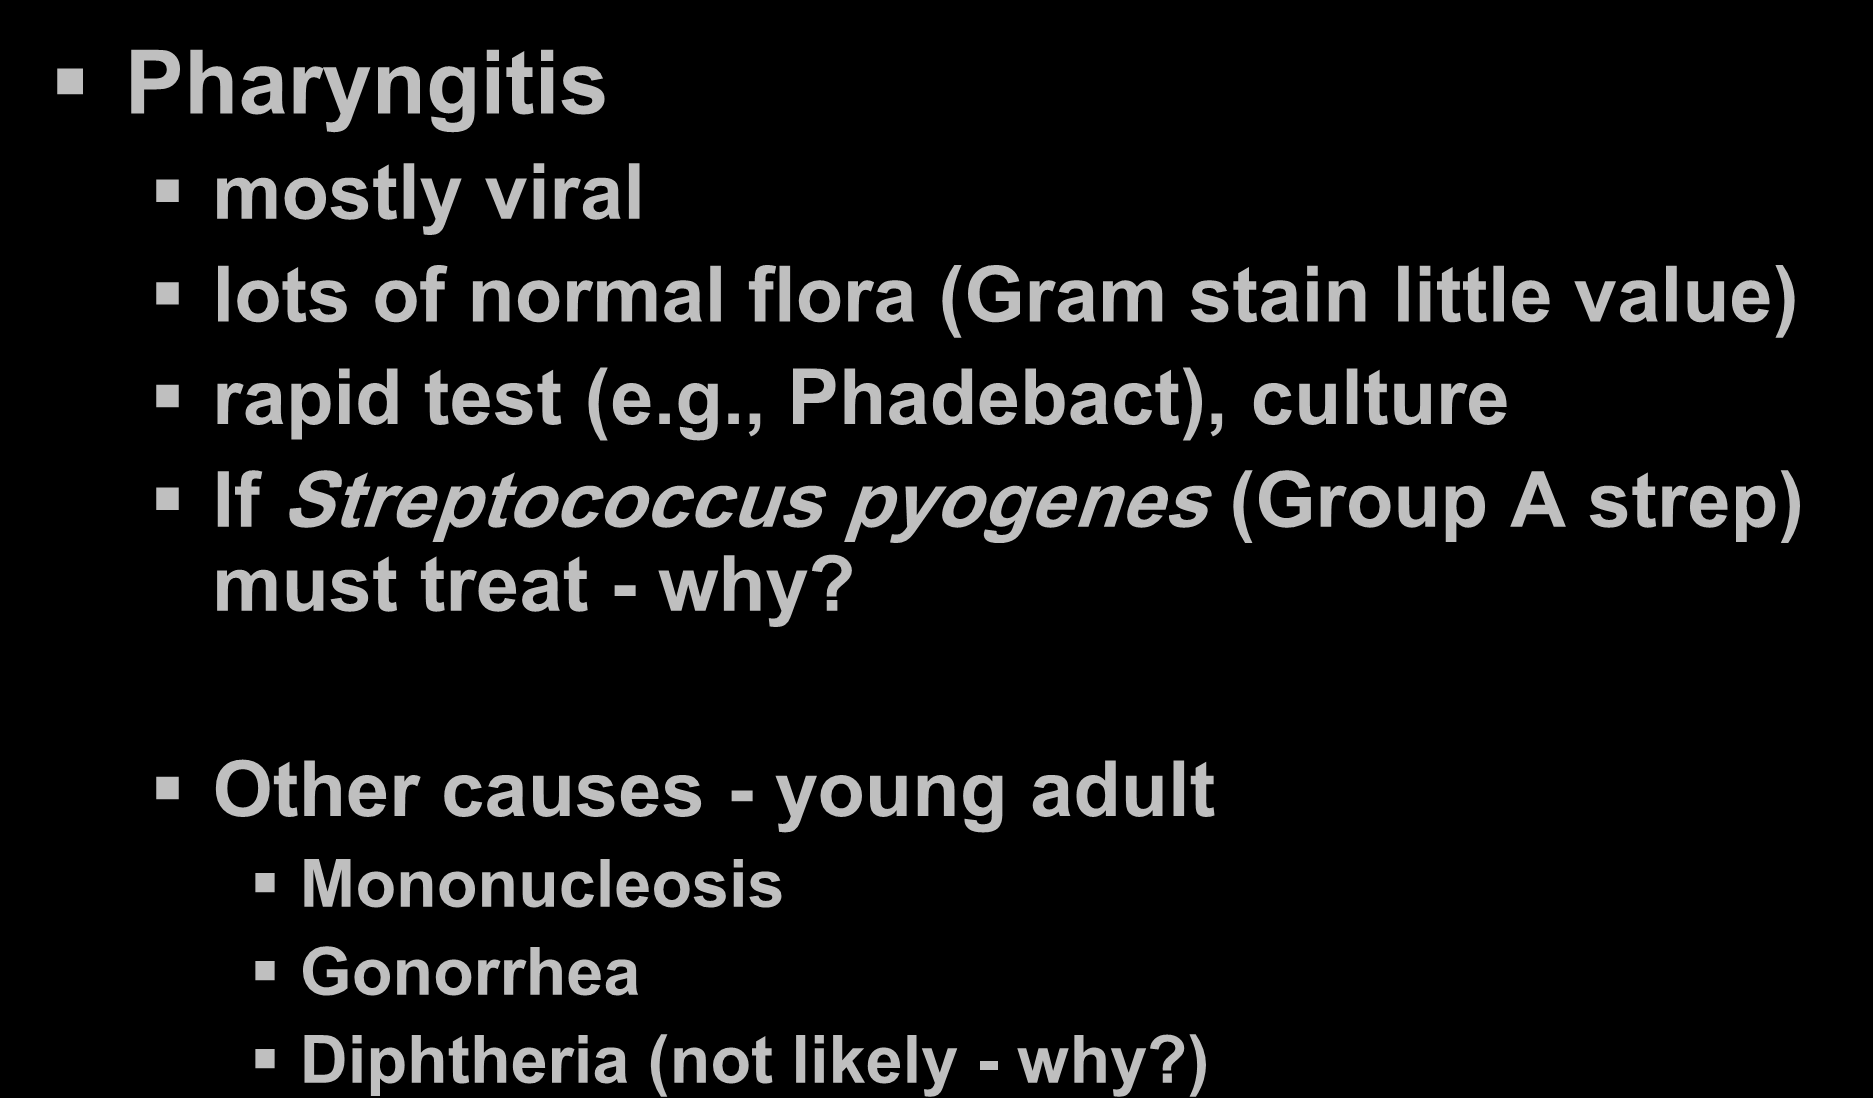 Upper Respiratory Tract Pharyngitis mostly viral lots of normal flora (Gram stain little value) rapid test (e.g., Phadebact), culture If Streptococcus pyogenes (Group A strep) must treat - why?